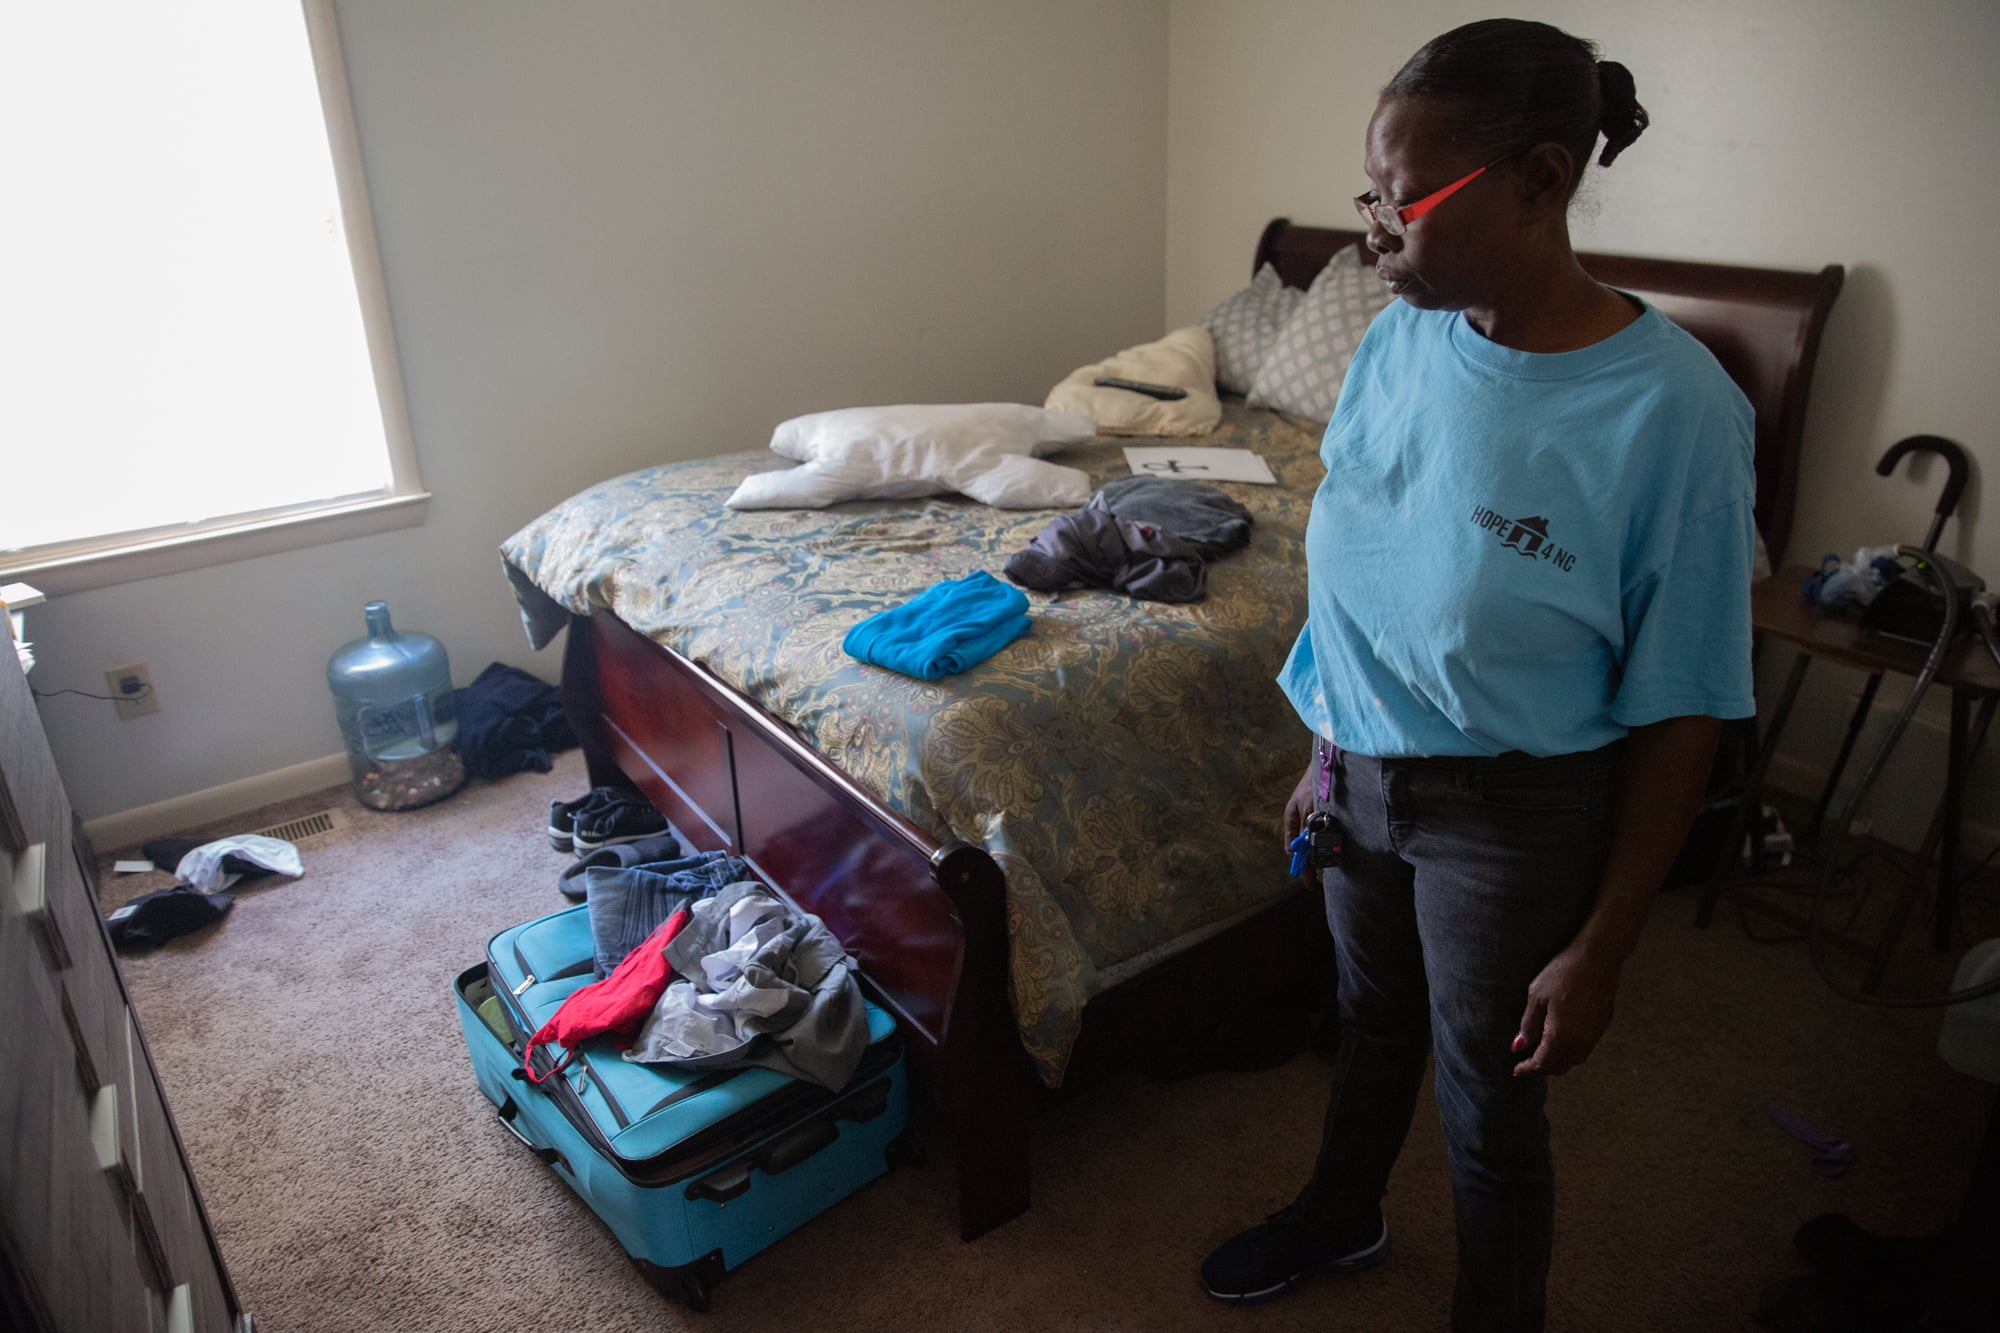 Regina Evans and her husband, Lloyd, have lived in a rental house since their home in Spring Lake, North Carolina, was badly damaged in Hurricane Florence in September. “We're getting more claustrophobic by the day,” Regina Evans said. (Harrison Mantas/ News21)